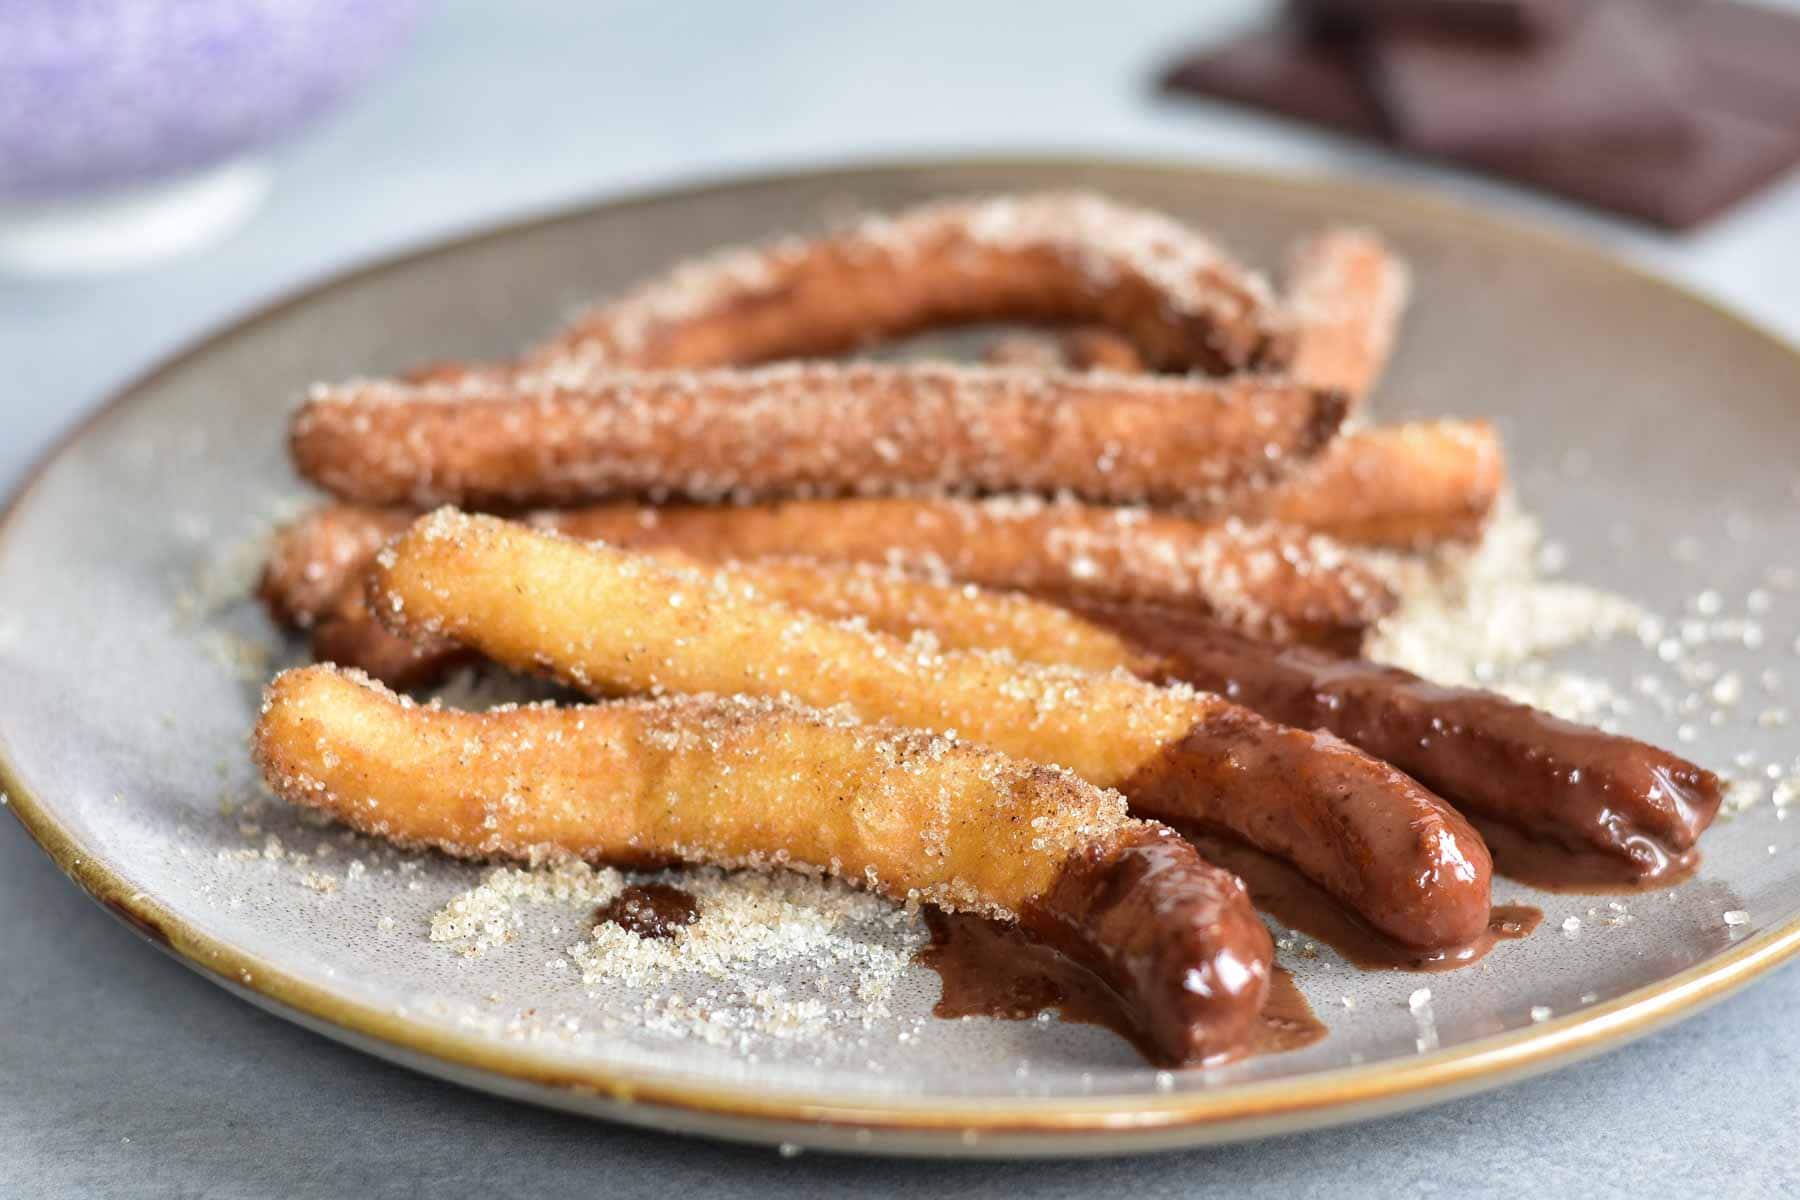 Churros with chocolate sauce on a brown plate.